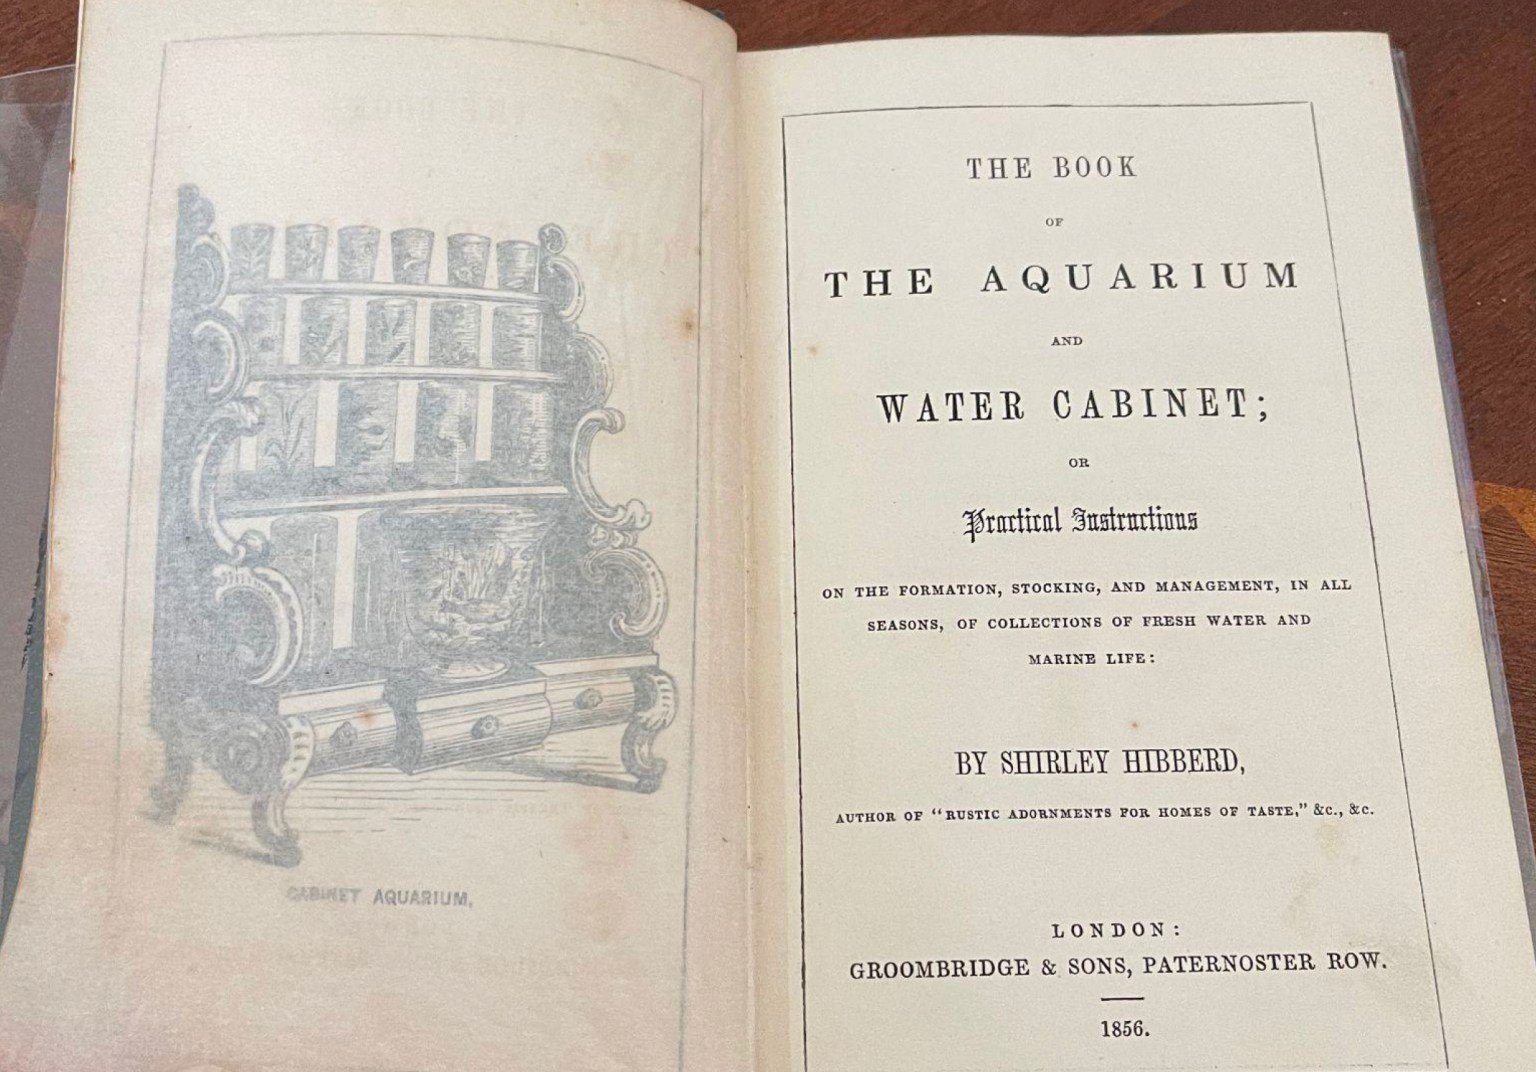 Museum-collections-including-the-Book-of-the-Aquarium-1536x1072.jpeg